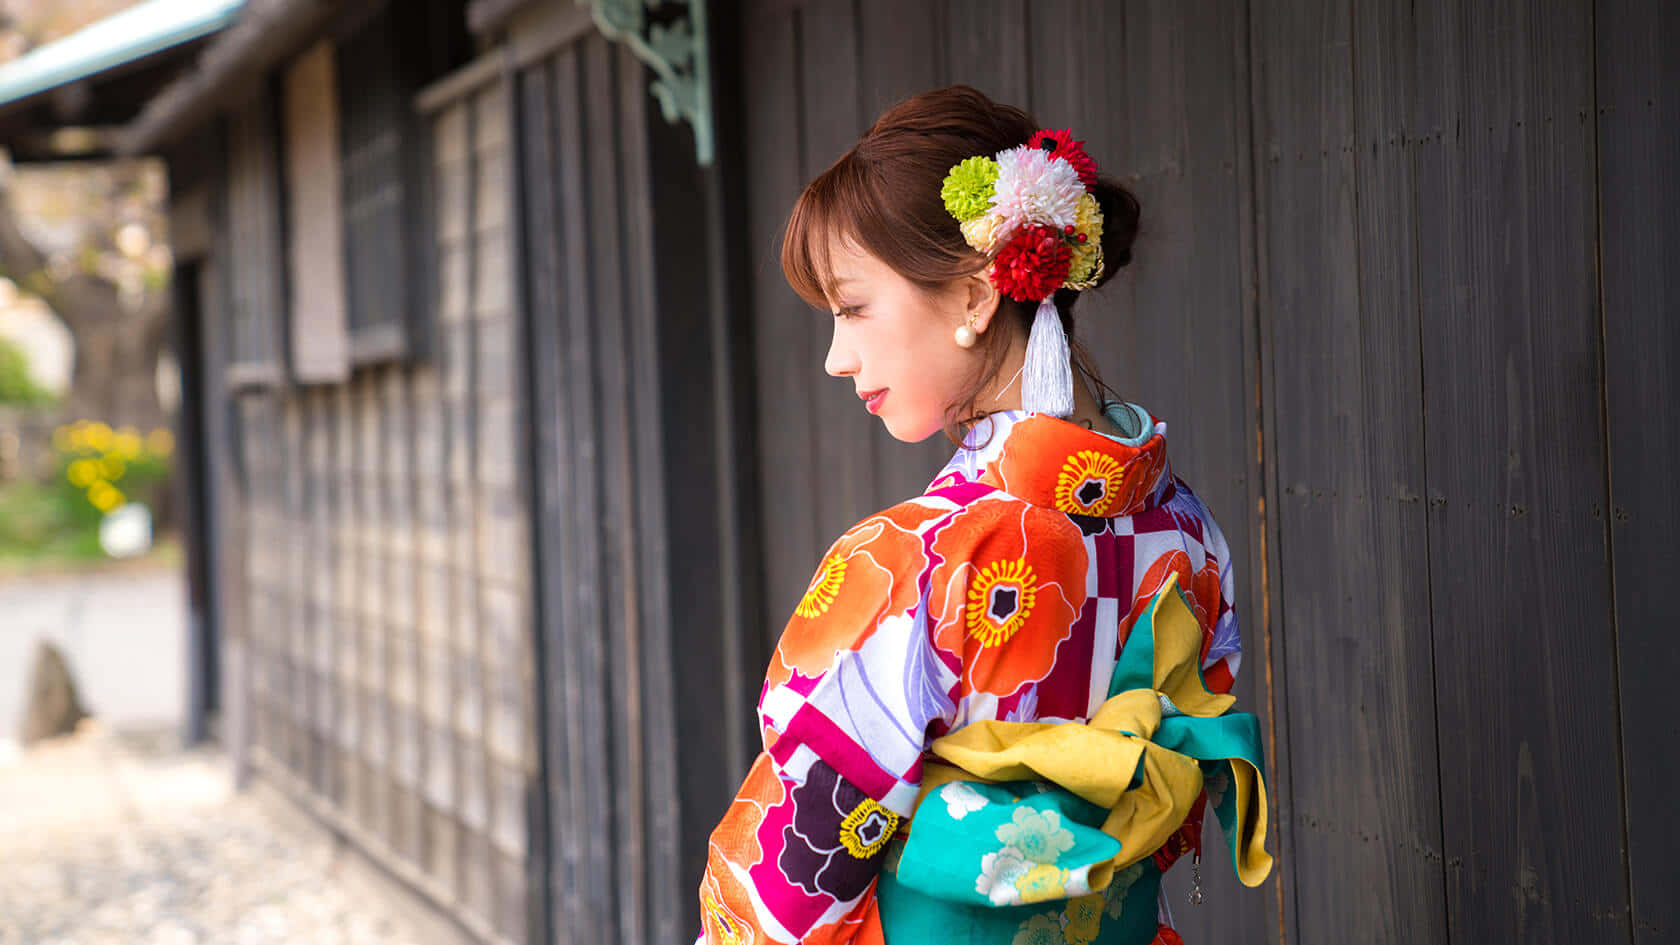 A Woman In A Kimono Is Standing Next To A Wooden Building